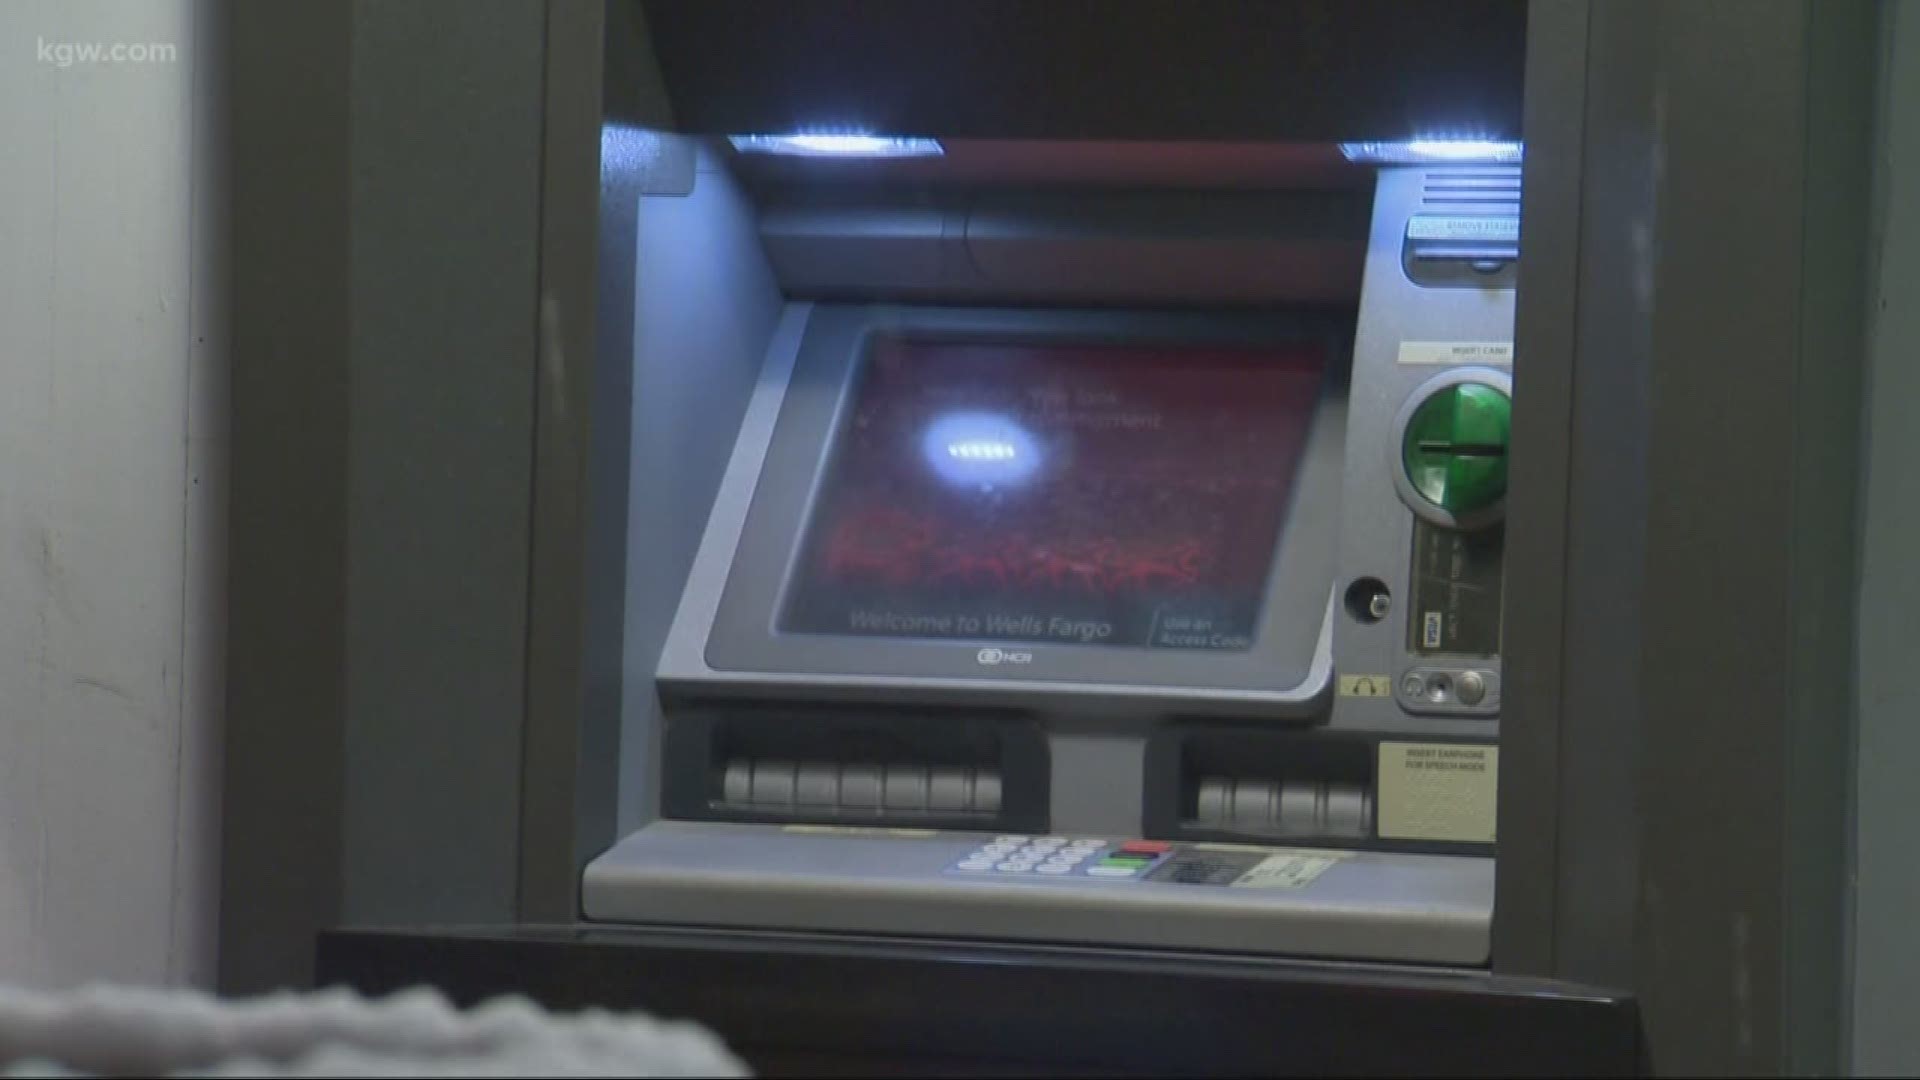 A Tualatin man become one of the multiple people who has fallen victim to skimmers placed on area ATMs.